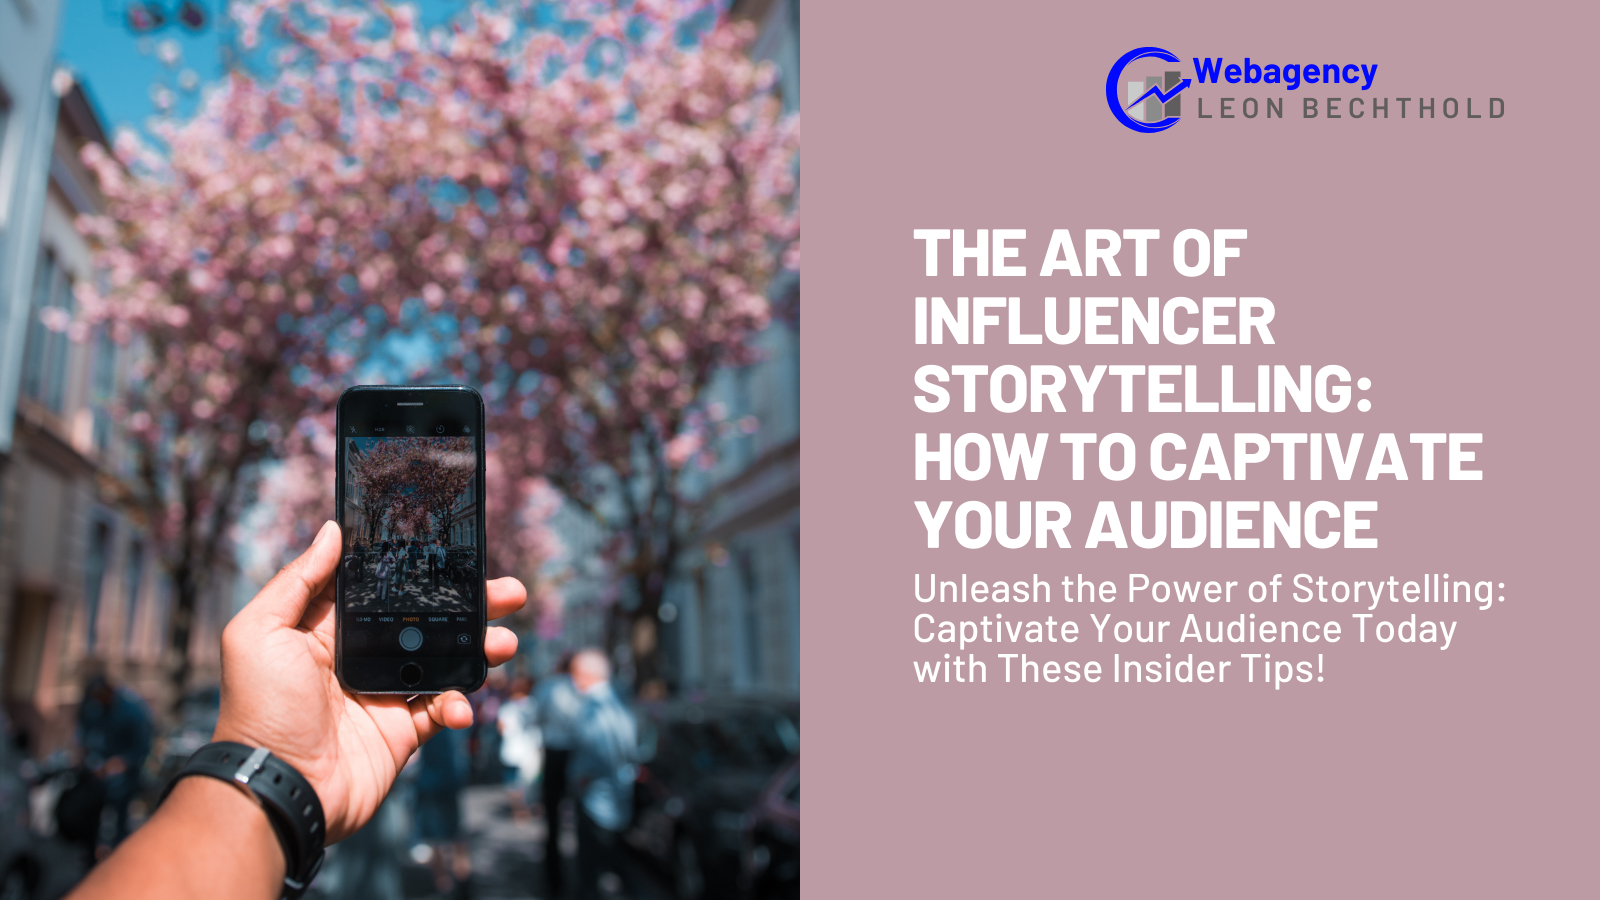 The Art of Influencer Storytelling: How to Captivate Your Audience